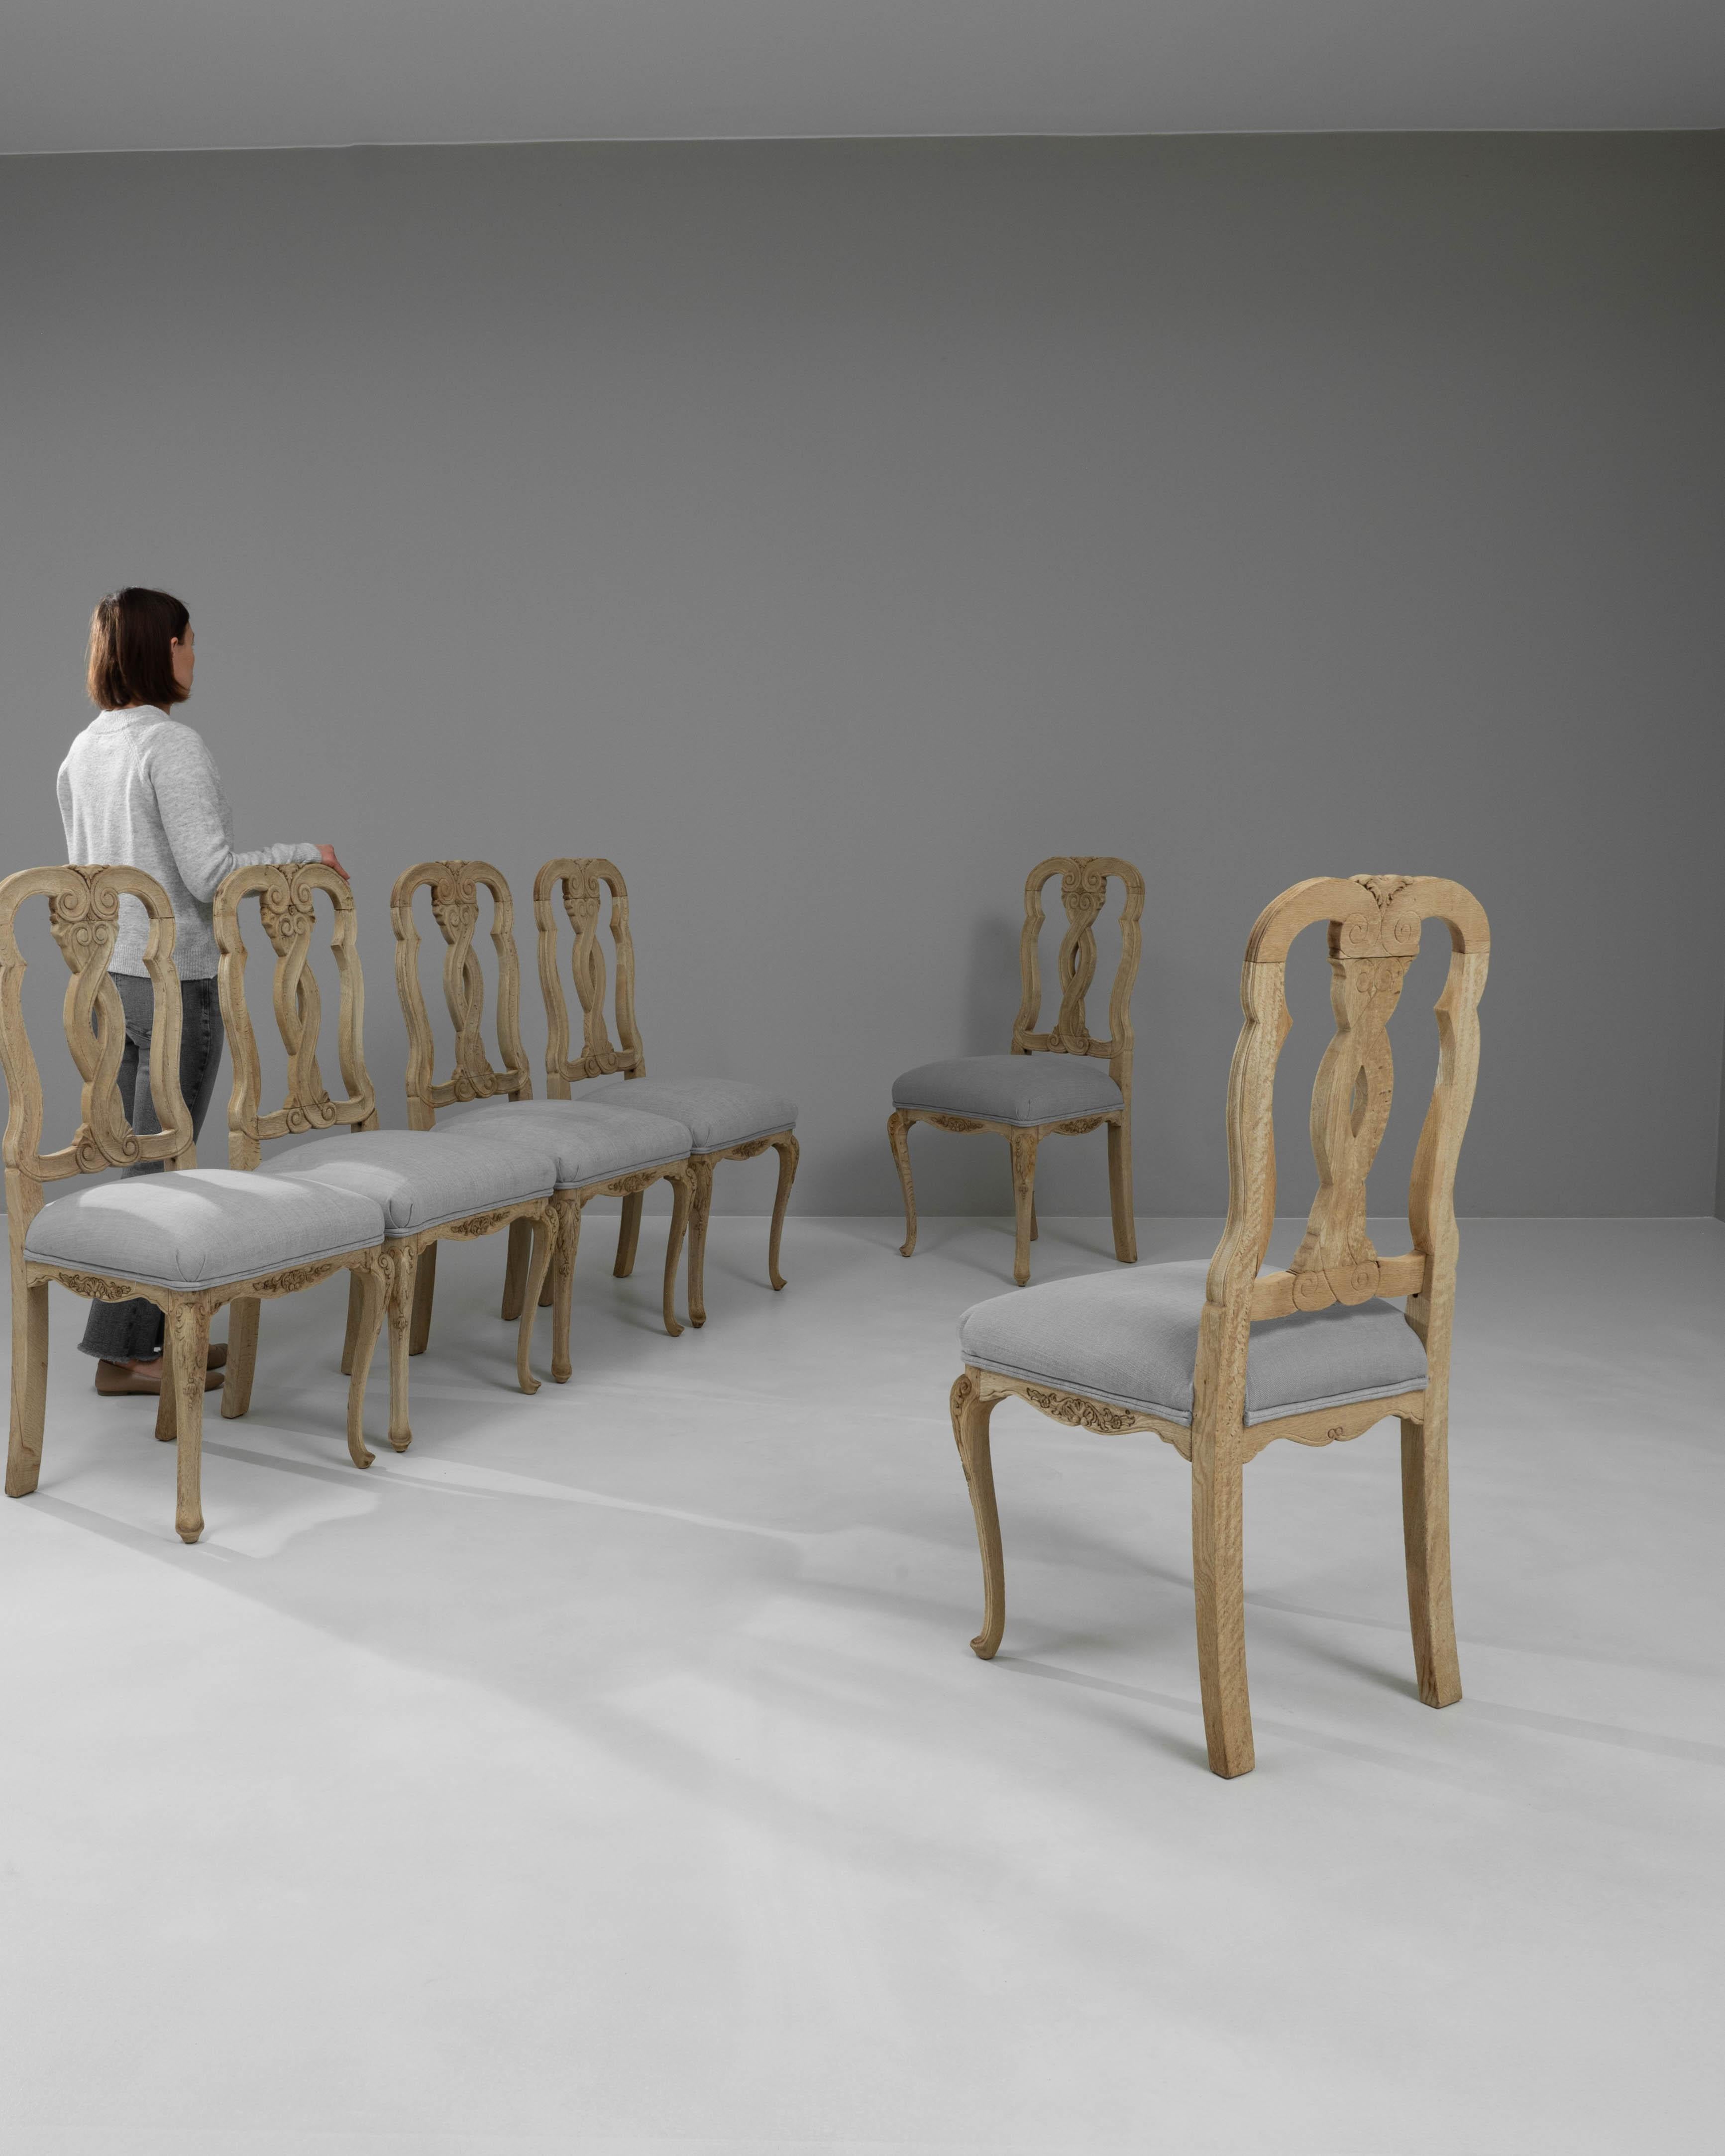 Introducing a magnificent set of six 20th Century French Bleached Oak Dining Chairs, each piece artfully crafted to bring timeless elegance into your home. With their graceful silhouettes and expertly carved sinuous details, these chairs capture the